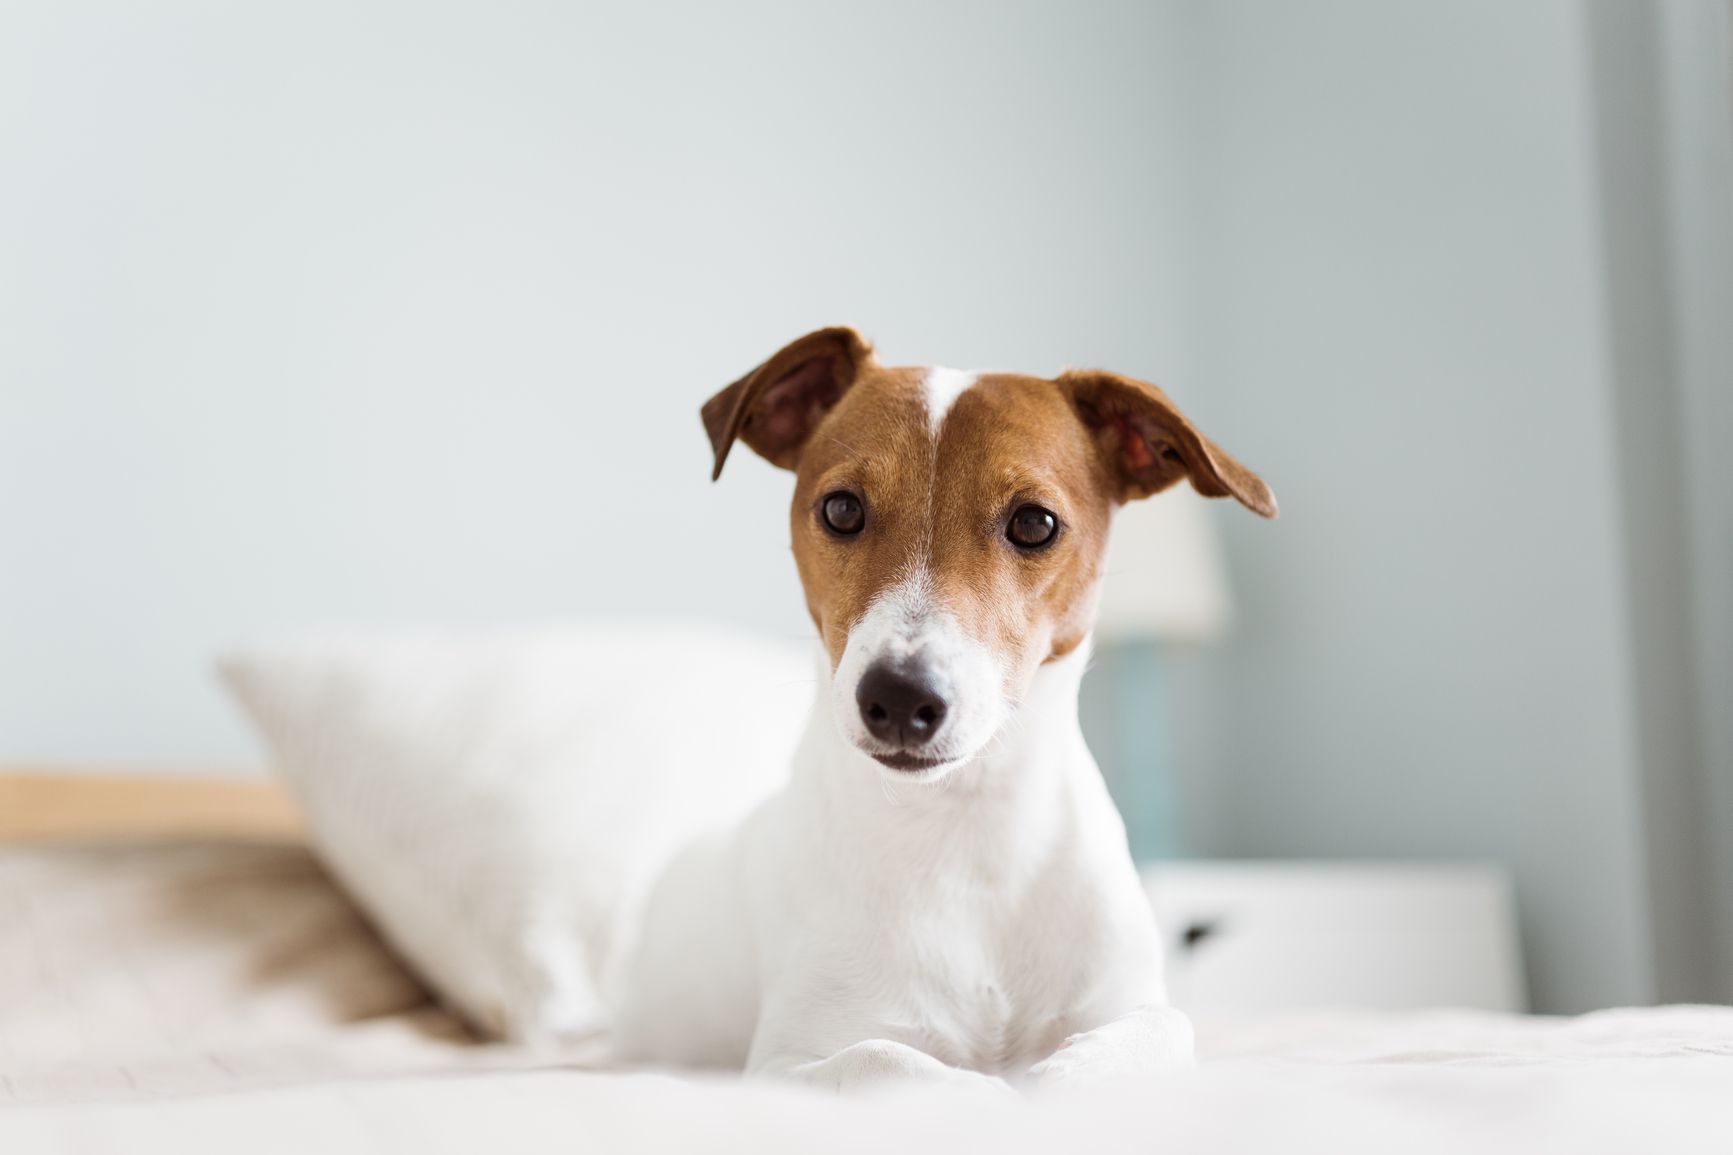 A Jack Russell Terrier on a bed